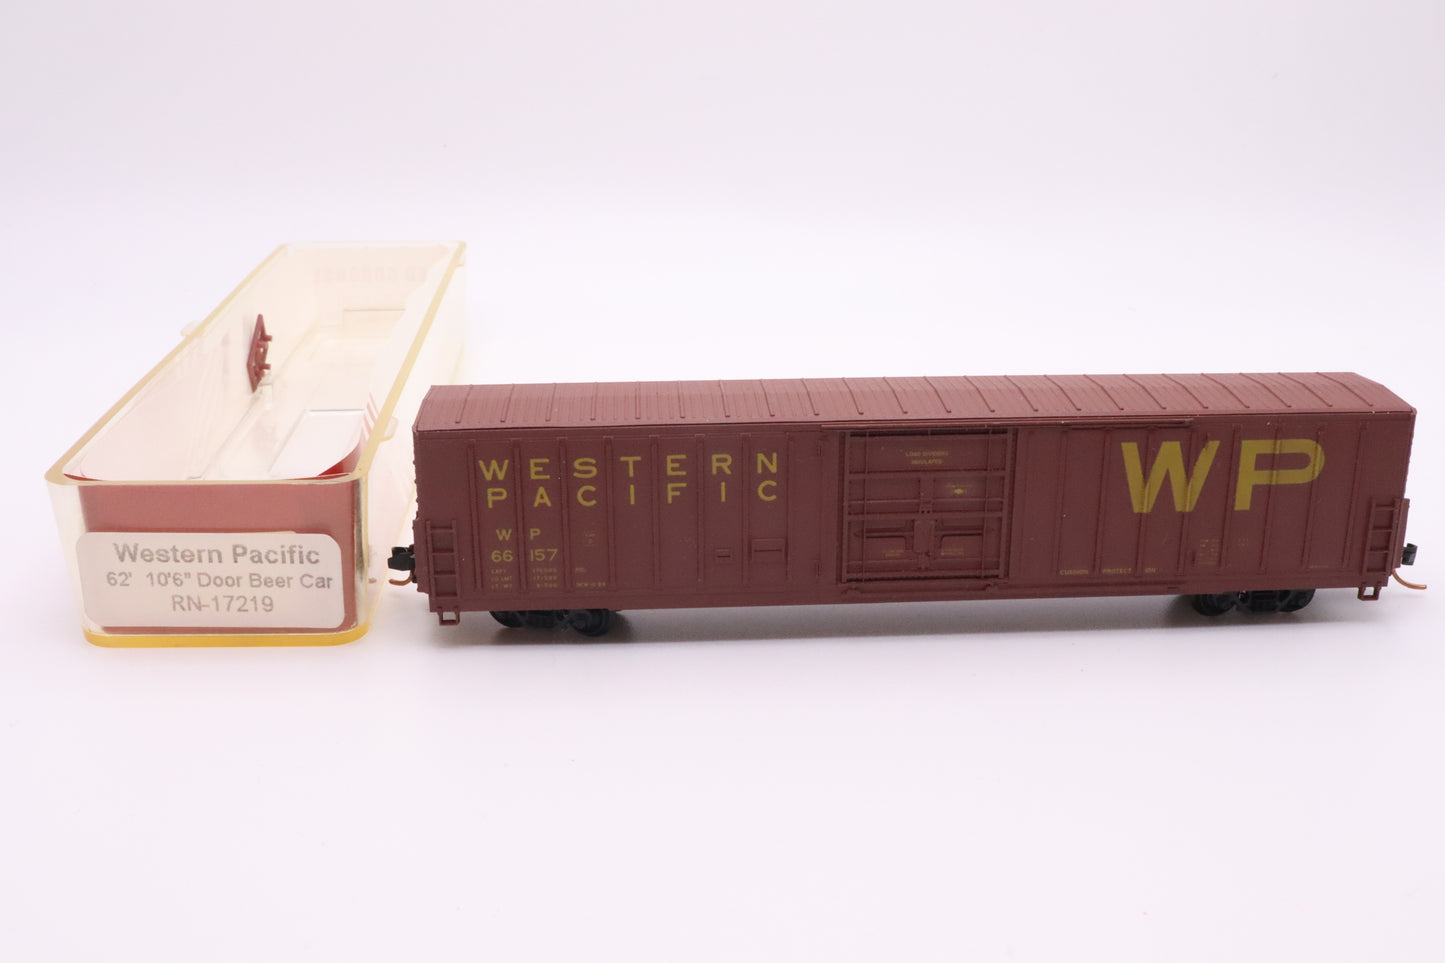 RED-RN-17219-3 - PC&F 62' Insulated Beer Boxcar w/10' 6" Door - Western Pacific - WP #66157